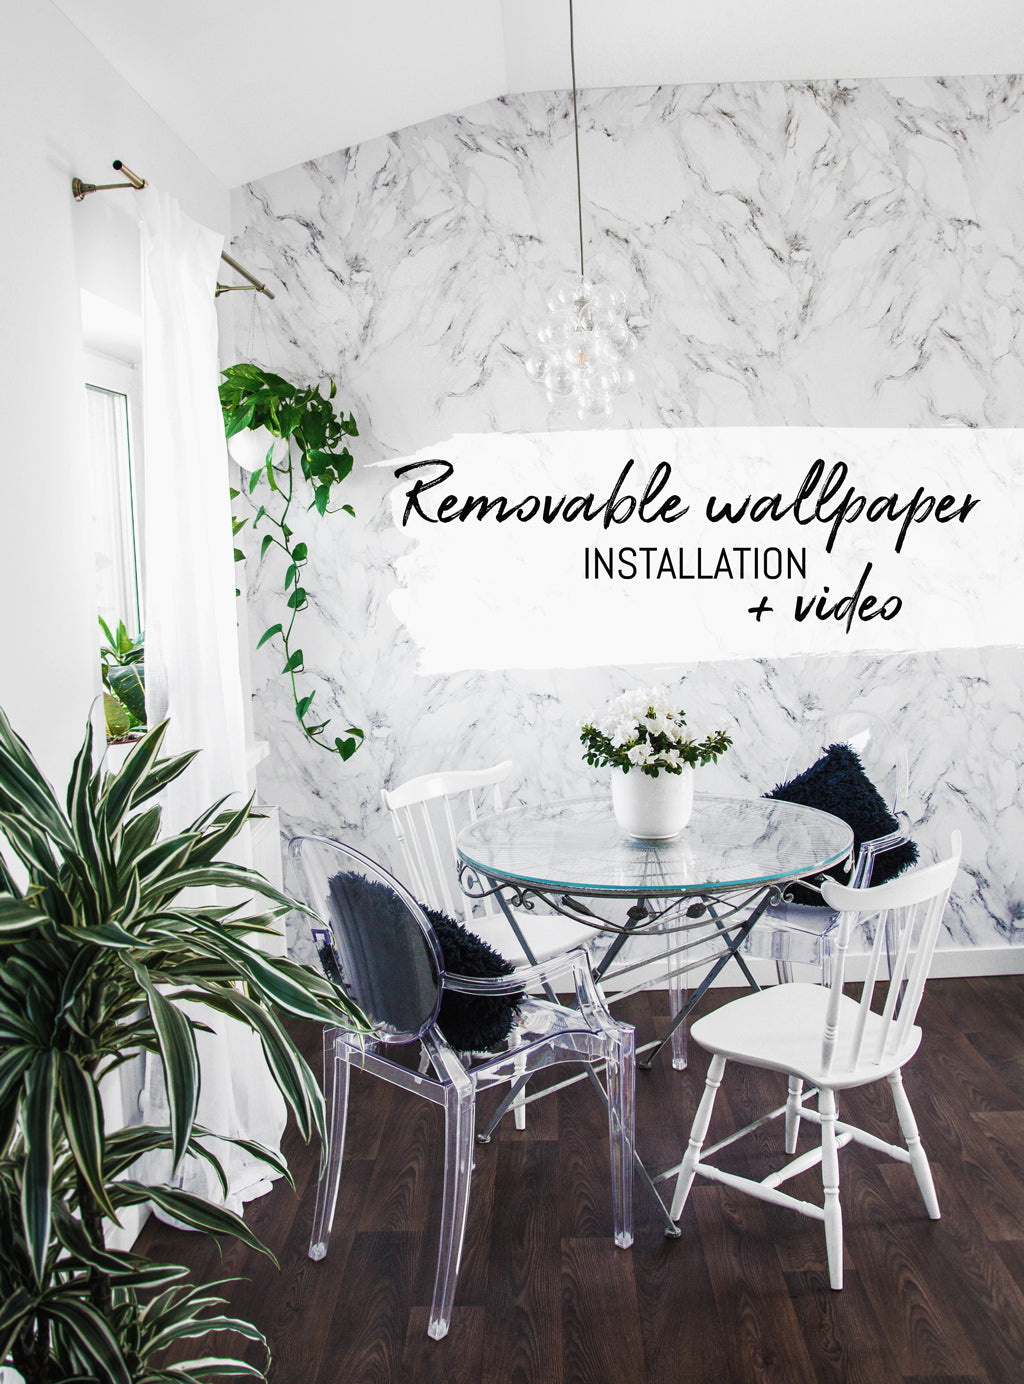 How to install removable wallpaper